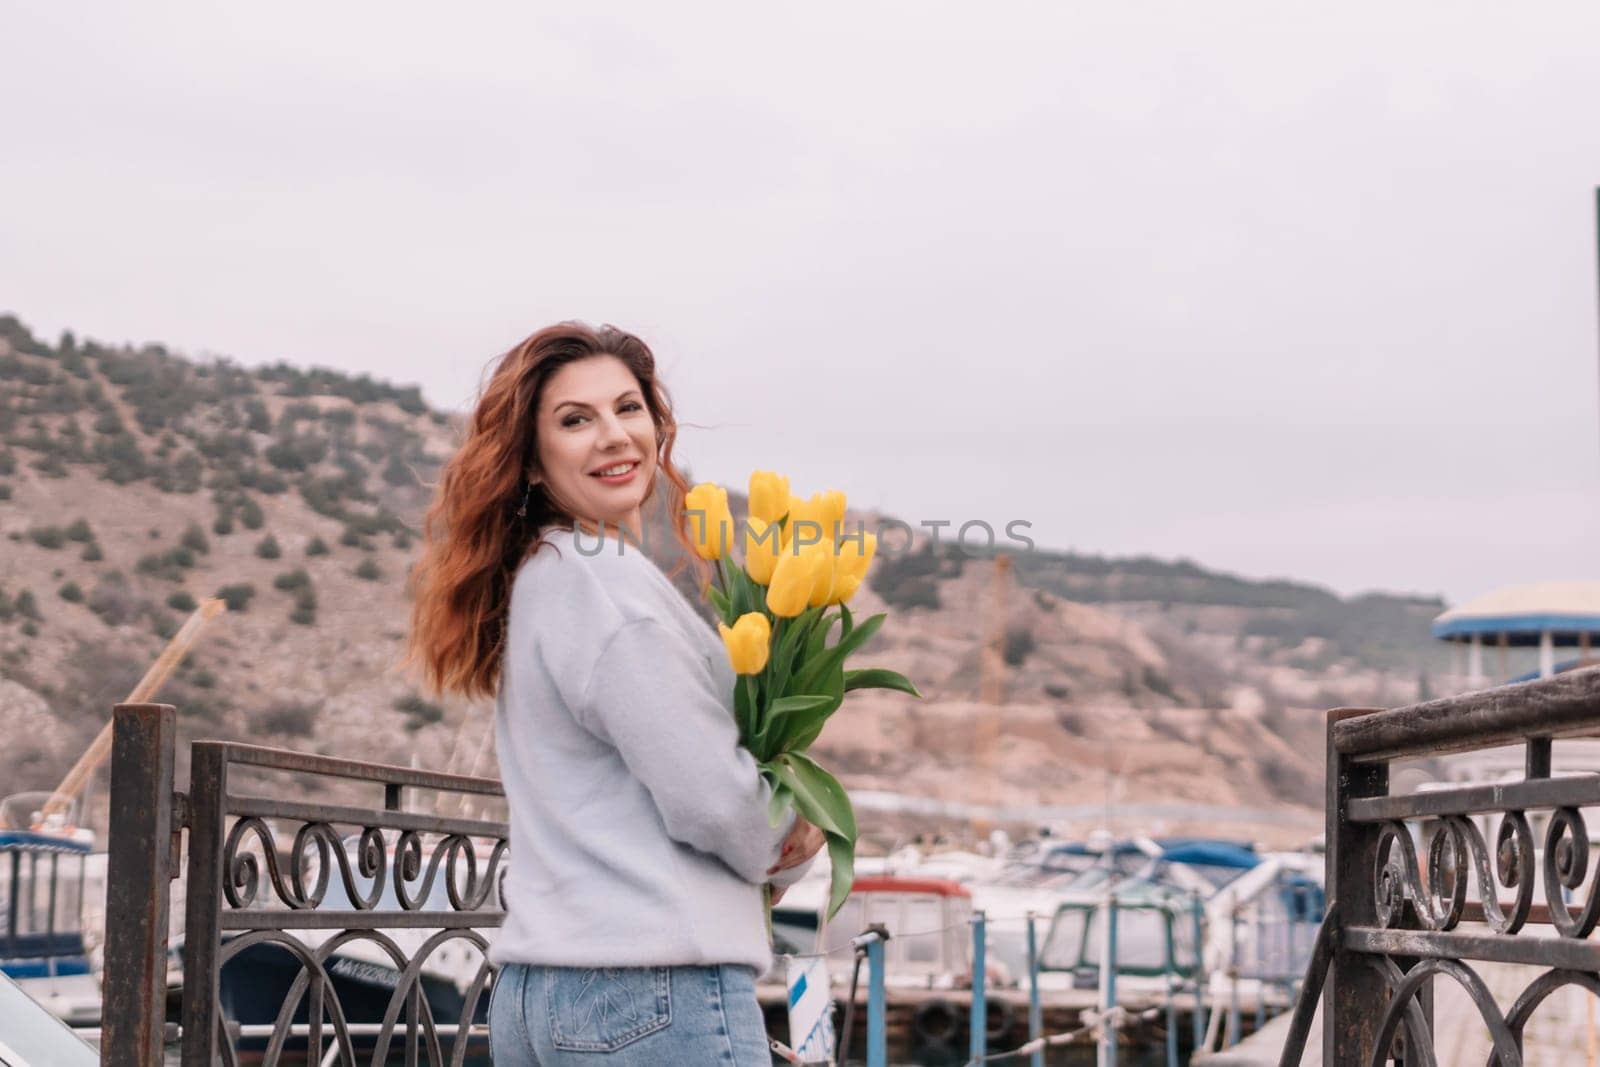 Woman holds yellow tulips in harbor with boats docked in the background., overcast day, yellow sweater, mountains by Matiunina